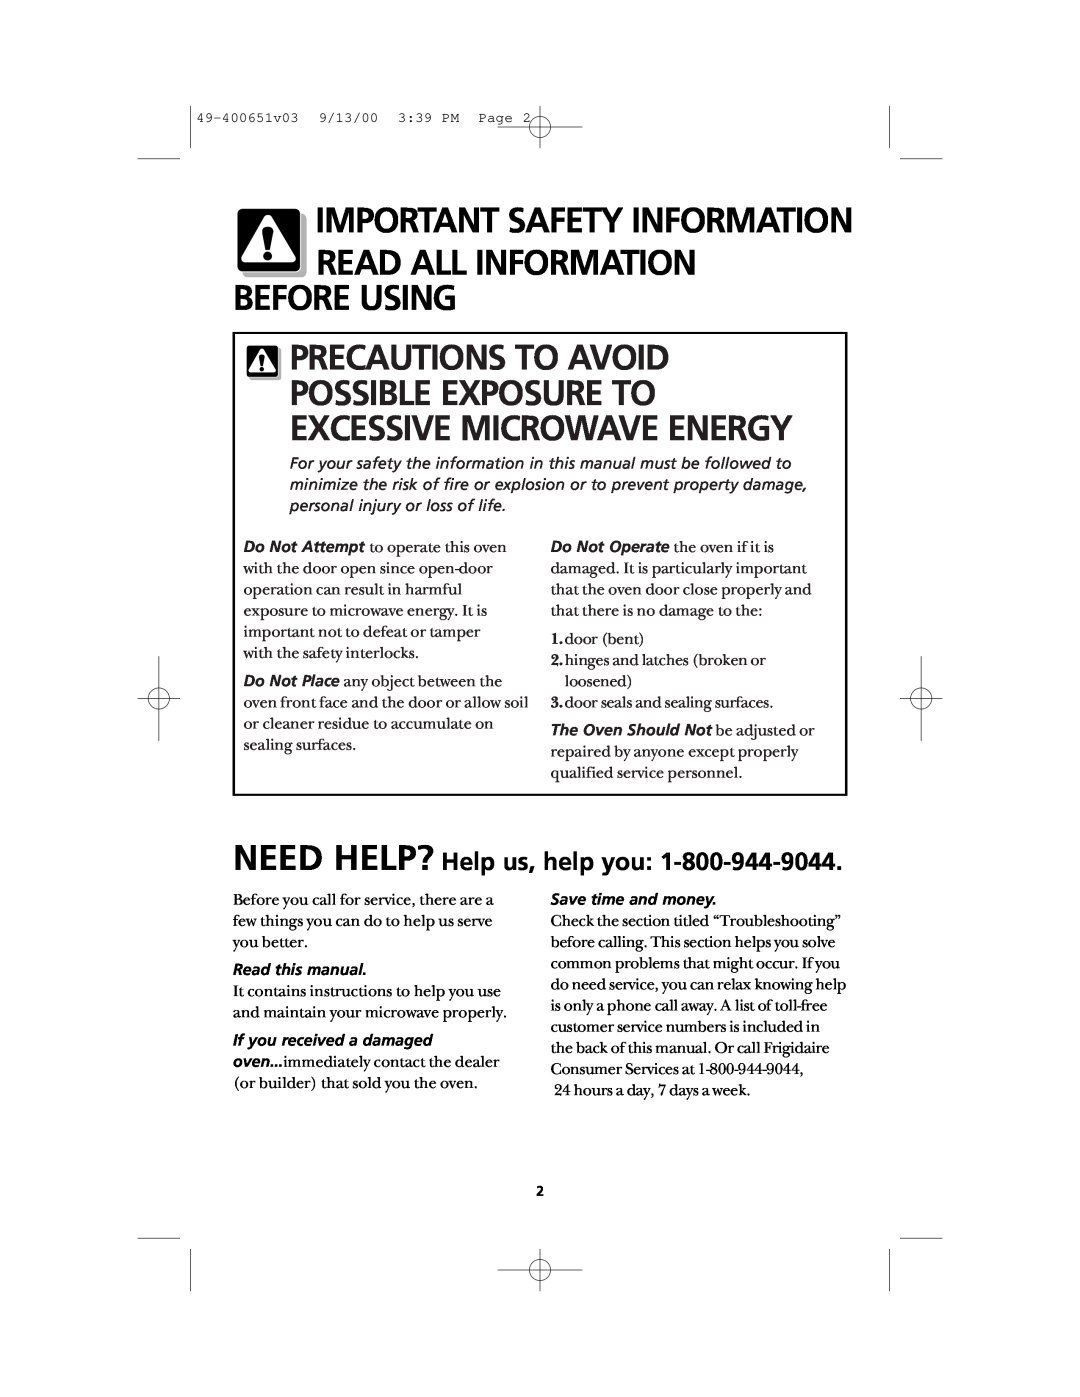 Frigidaire FMT148 warranty Important Safety Information, Precautions To Avoid, Read All Information Before Using 